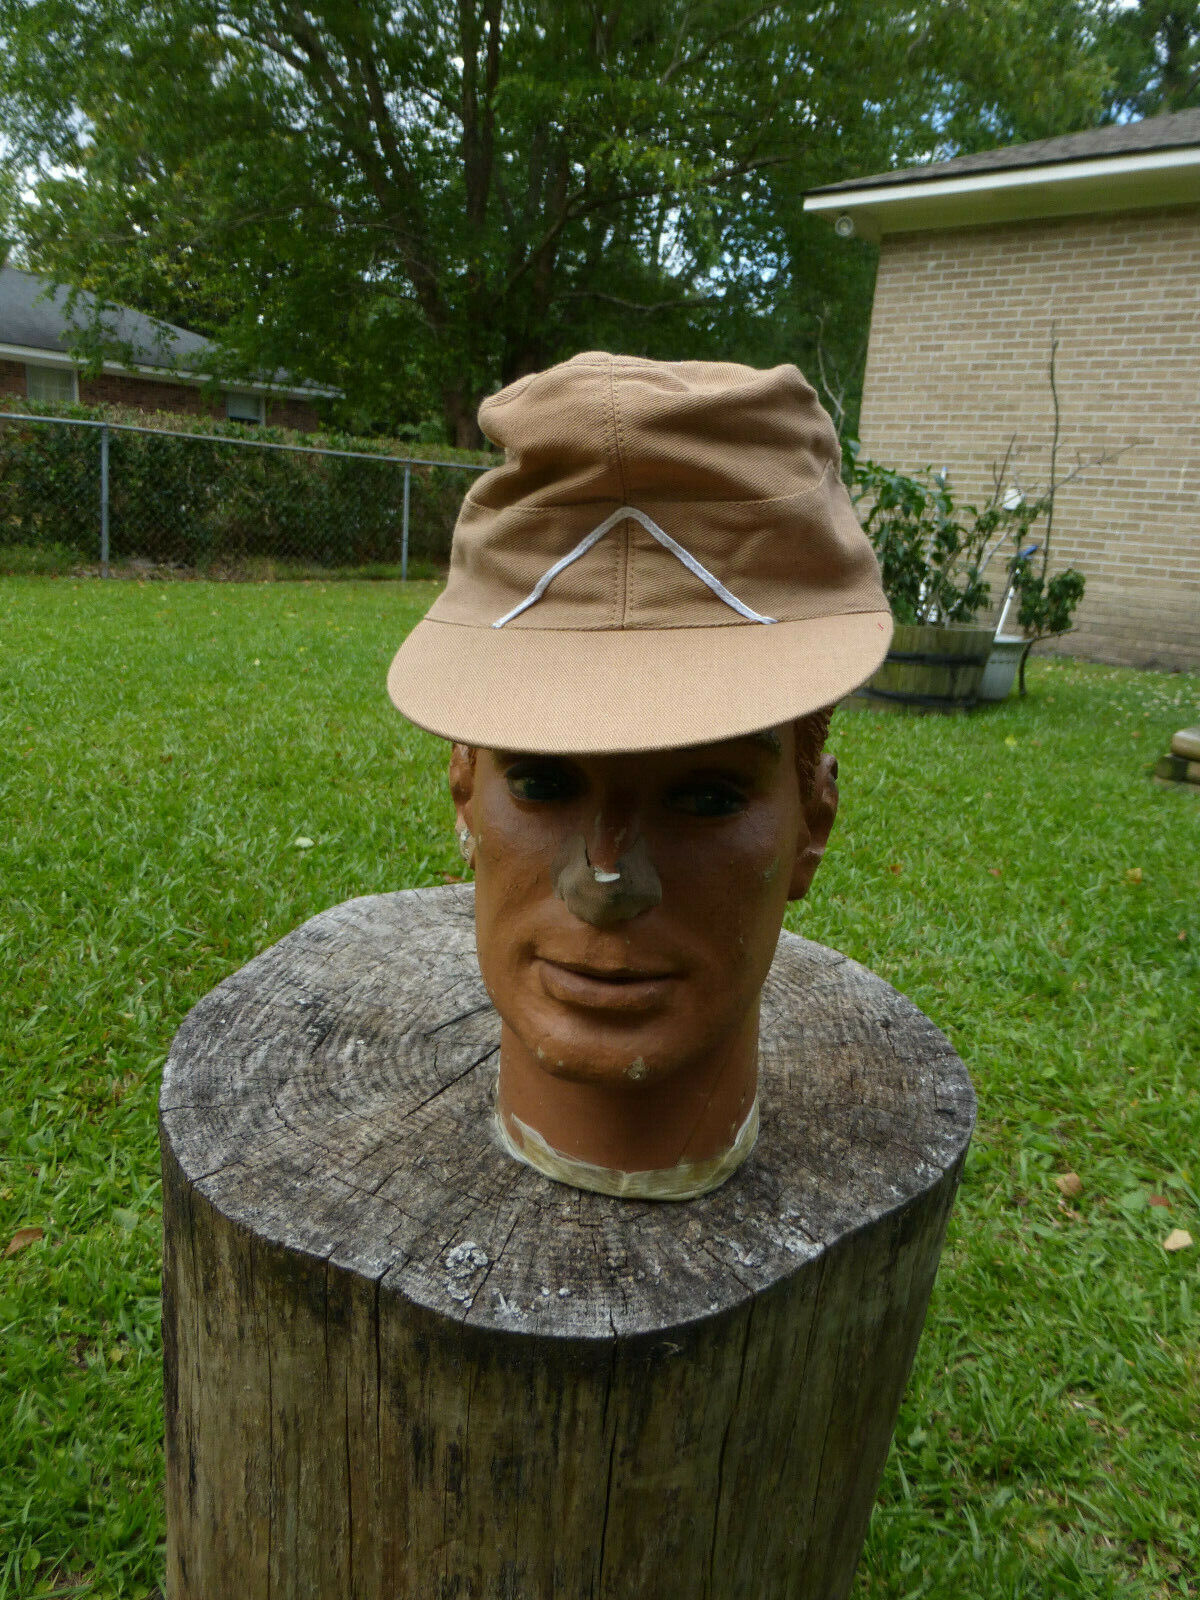 M43 AK infantry combat cap, tropical,   post war repro made for movies